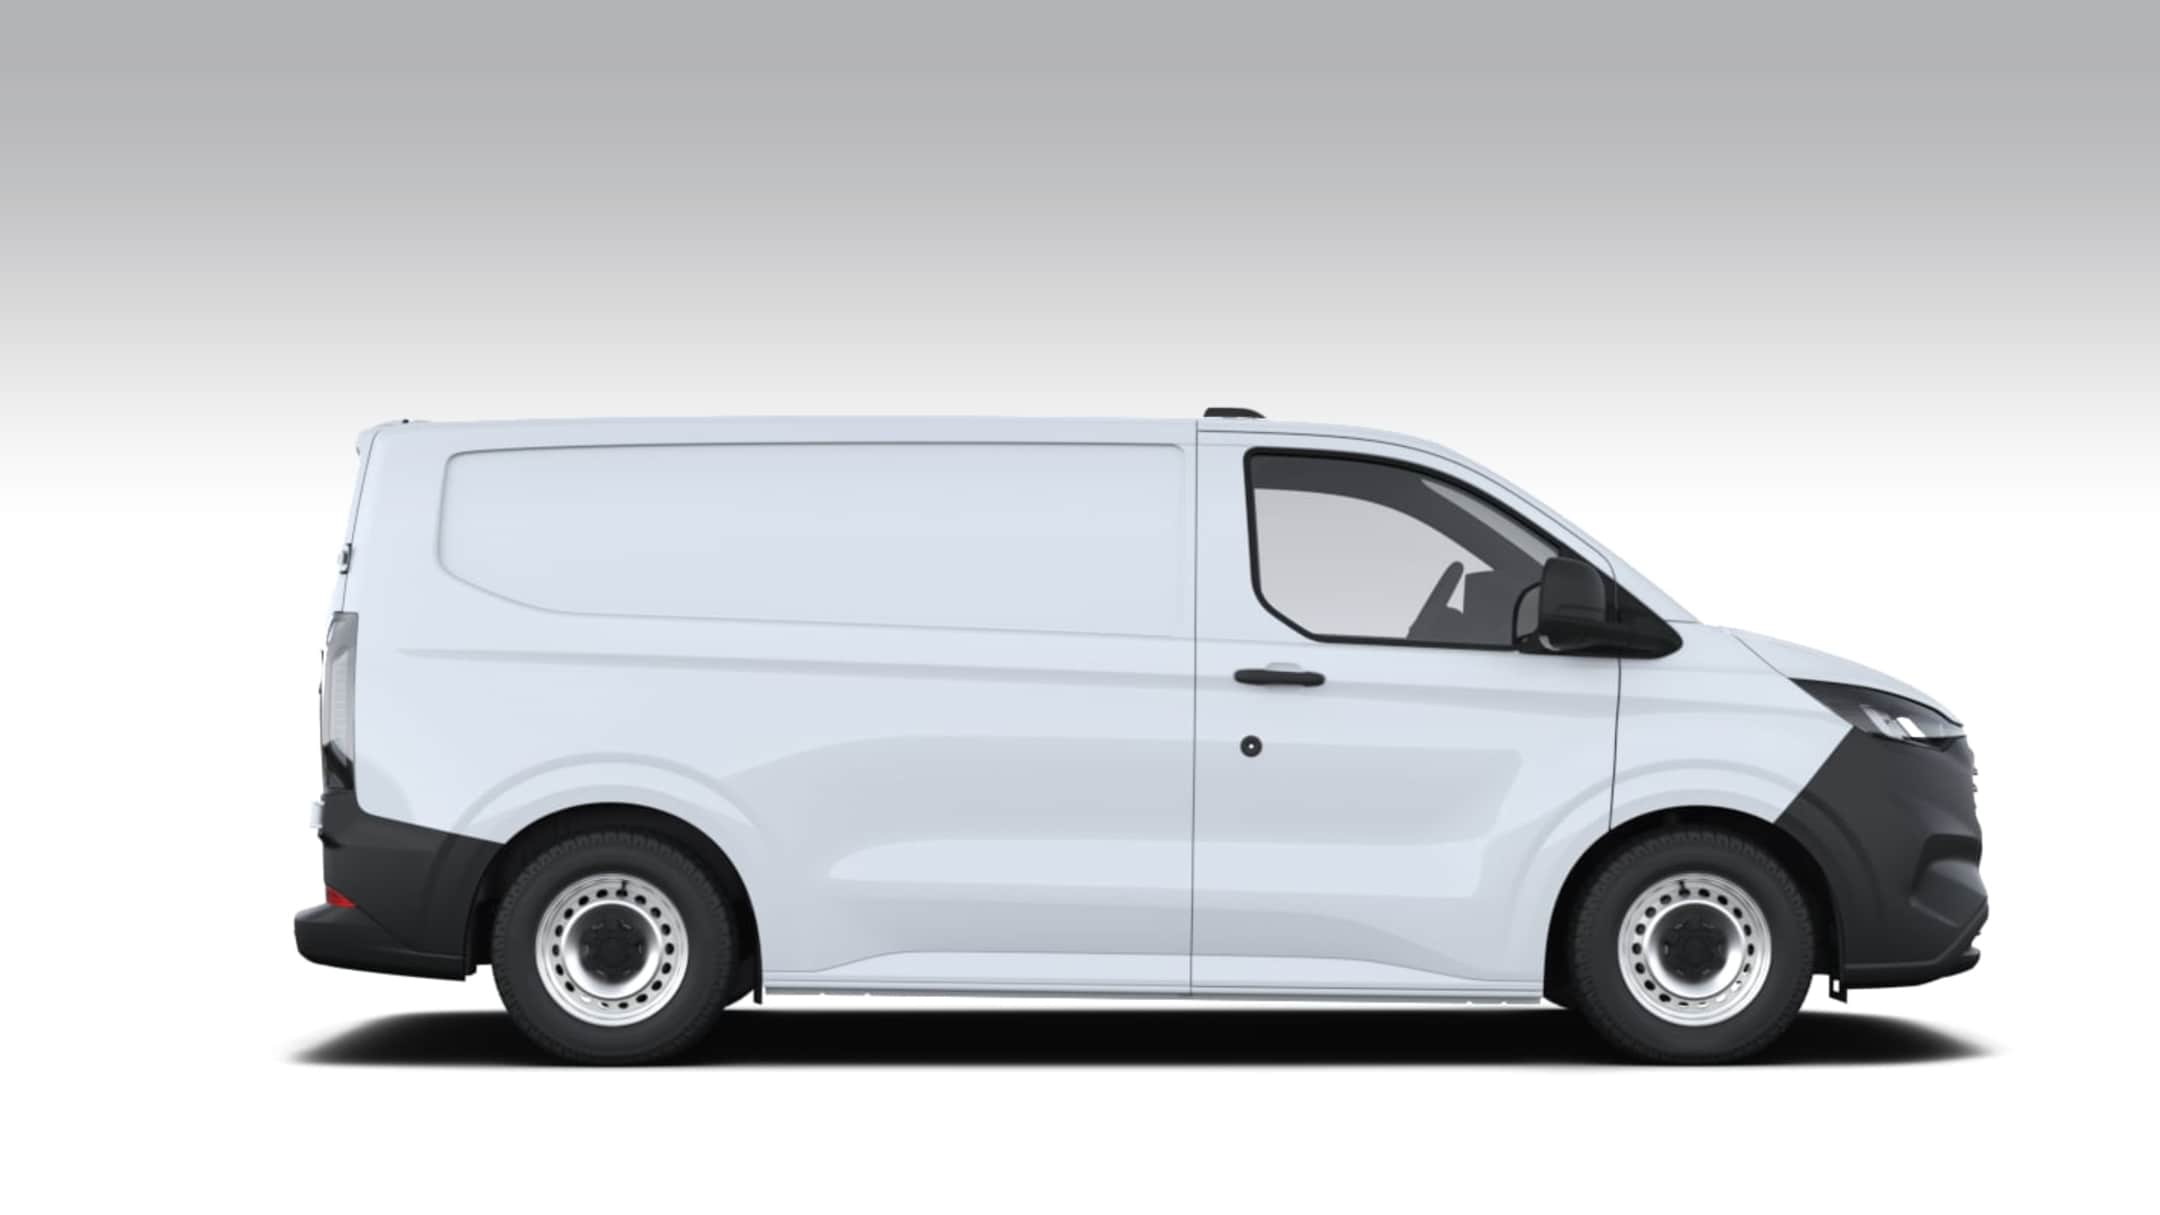 Side-on view of a white Ford Transit Van